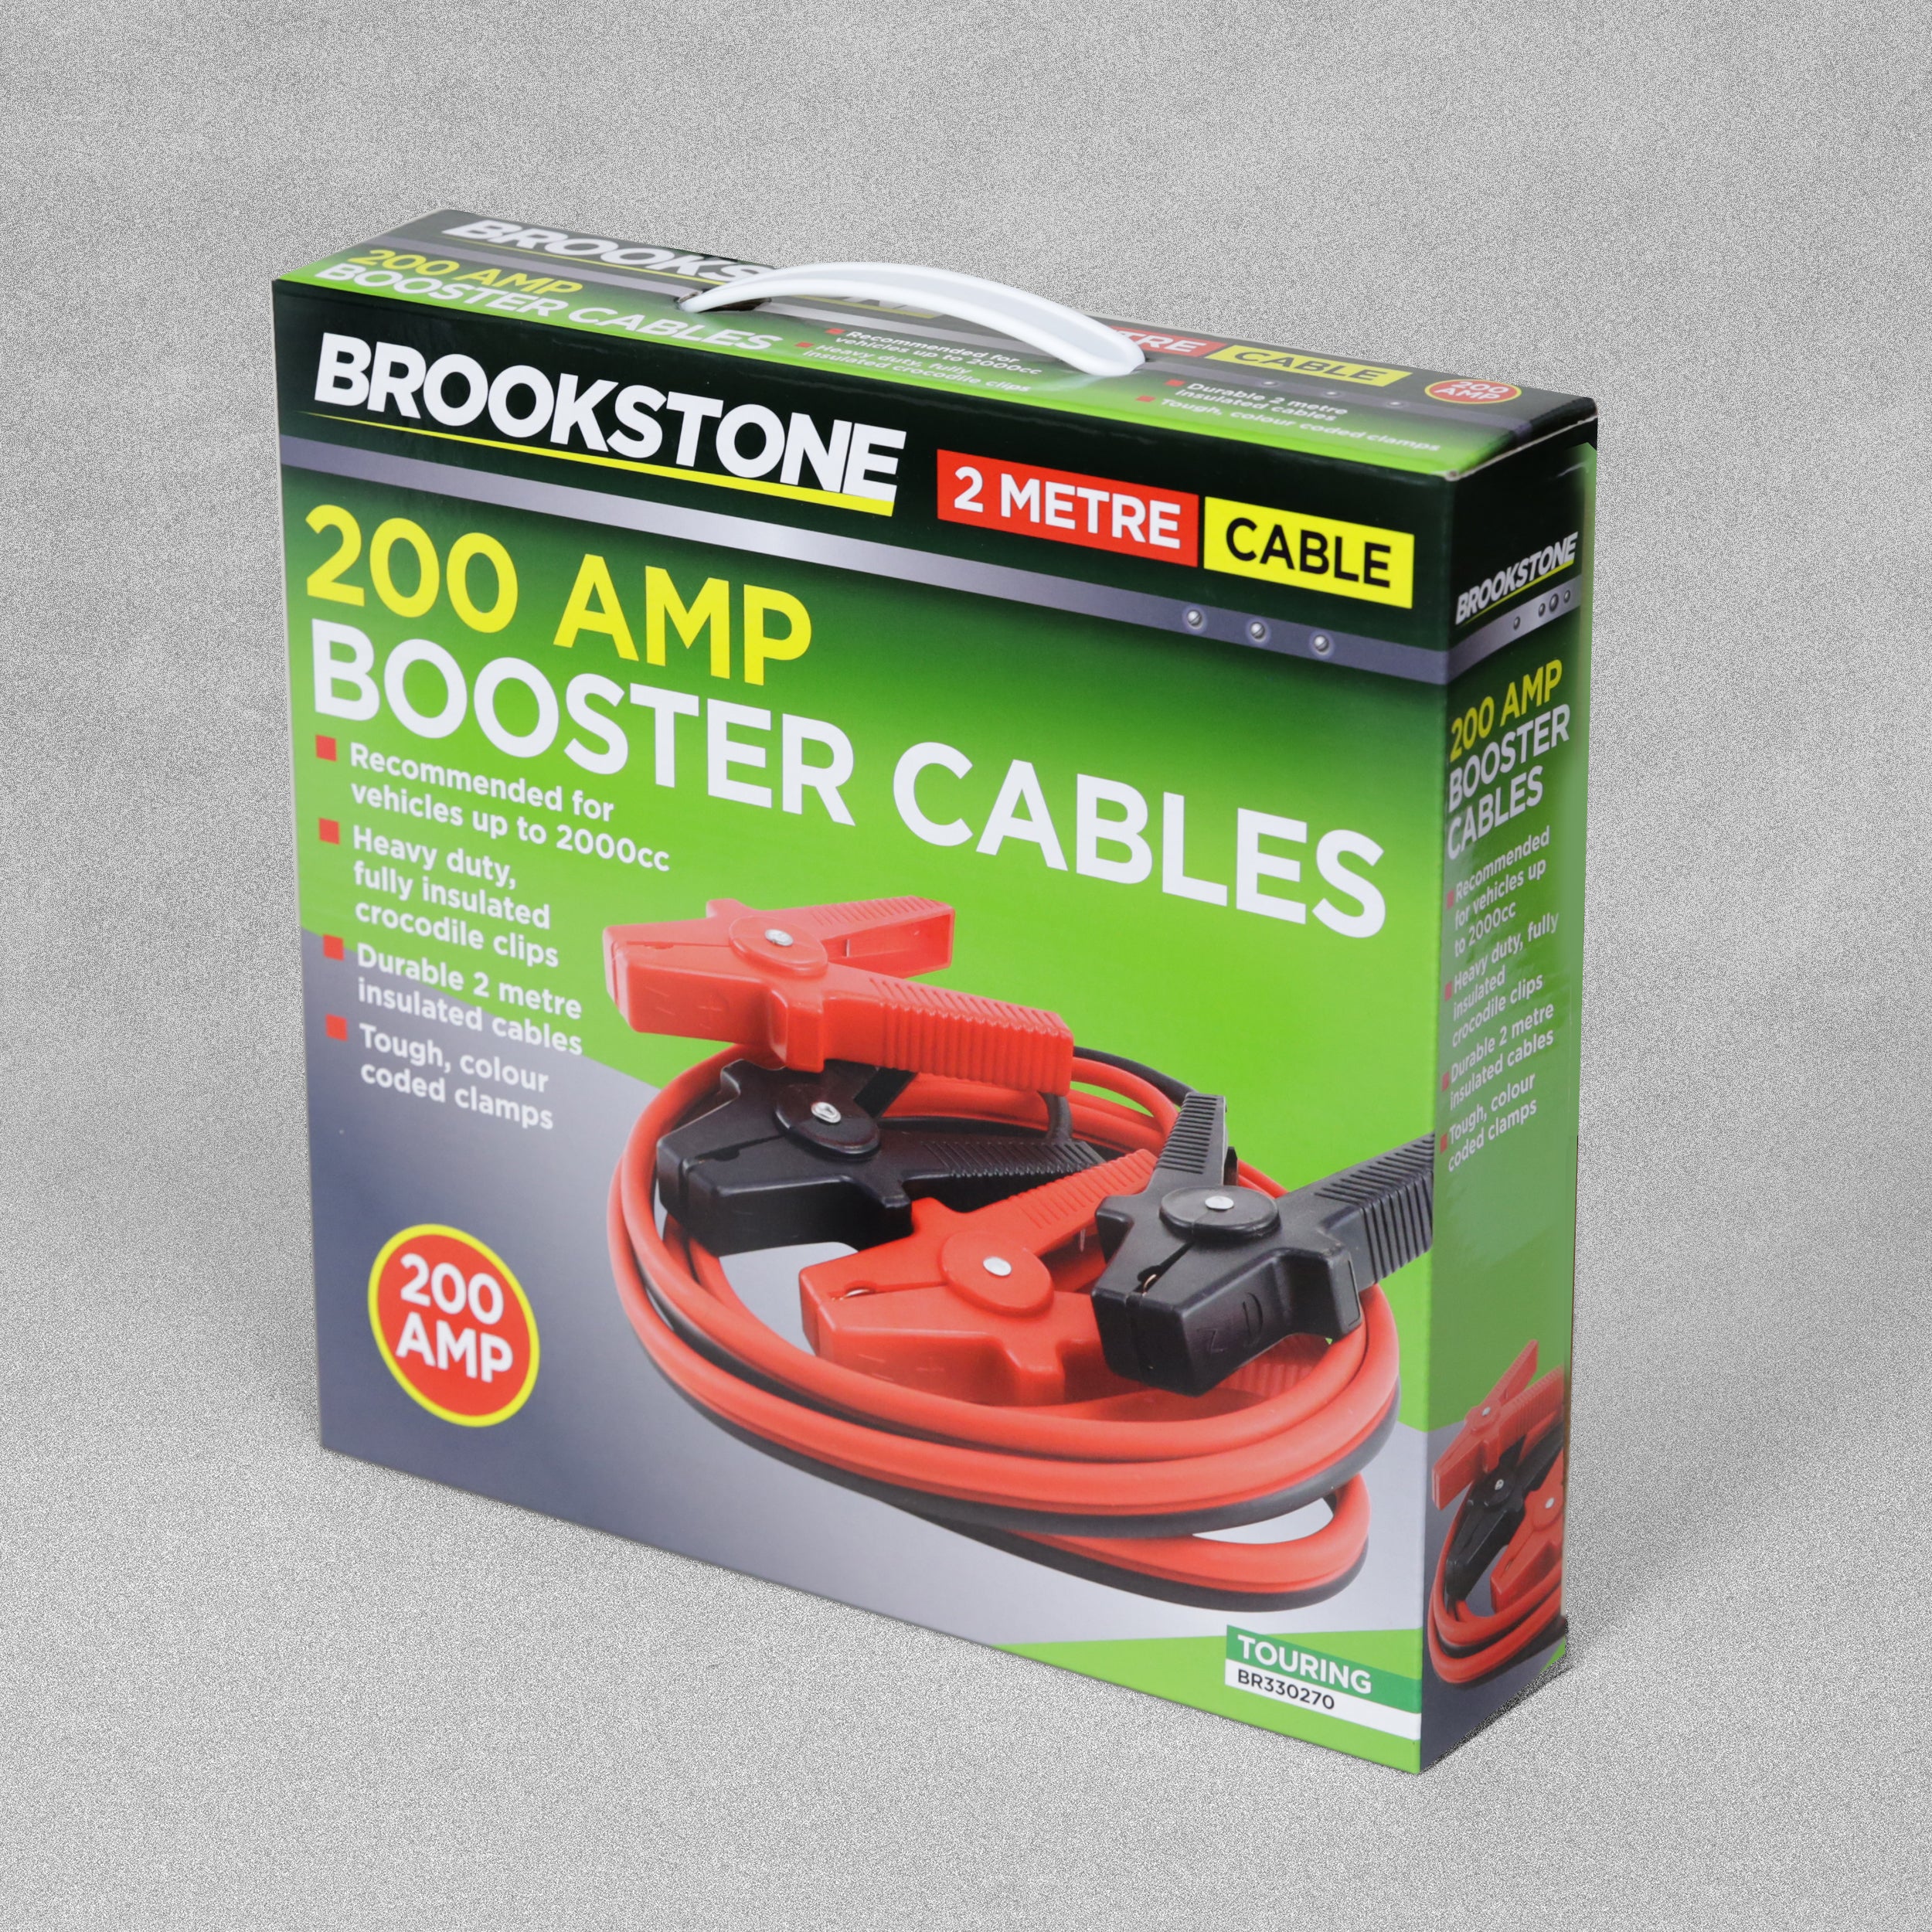 Brookstone 200 AMP Booster Cables - 2 Metre